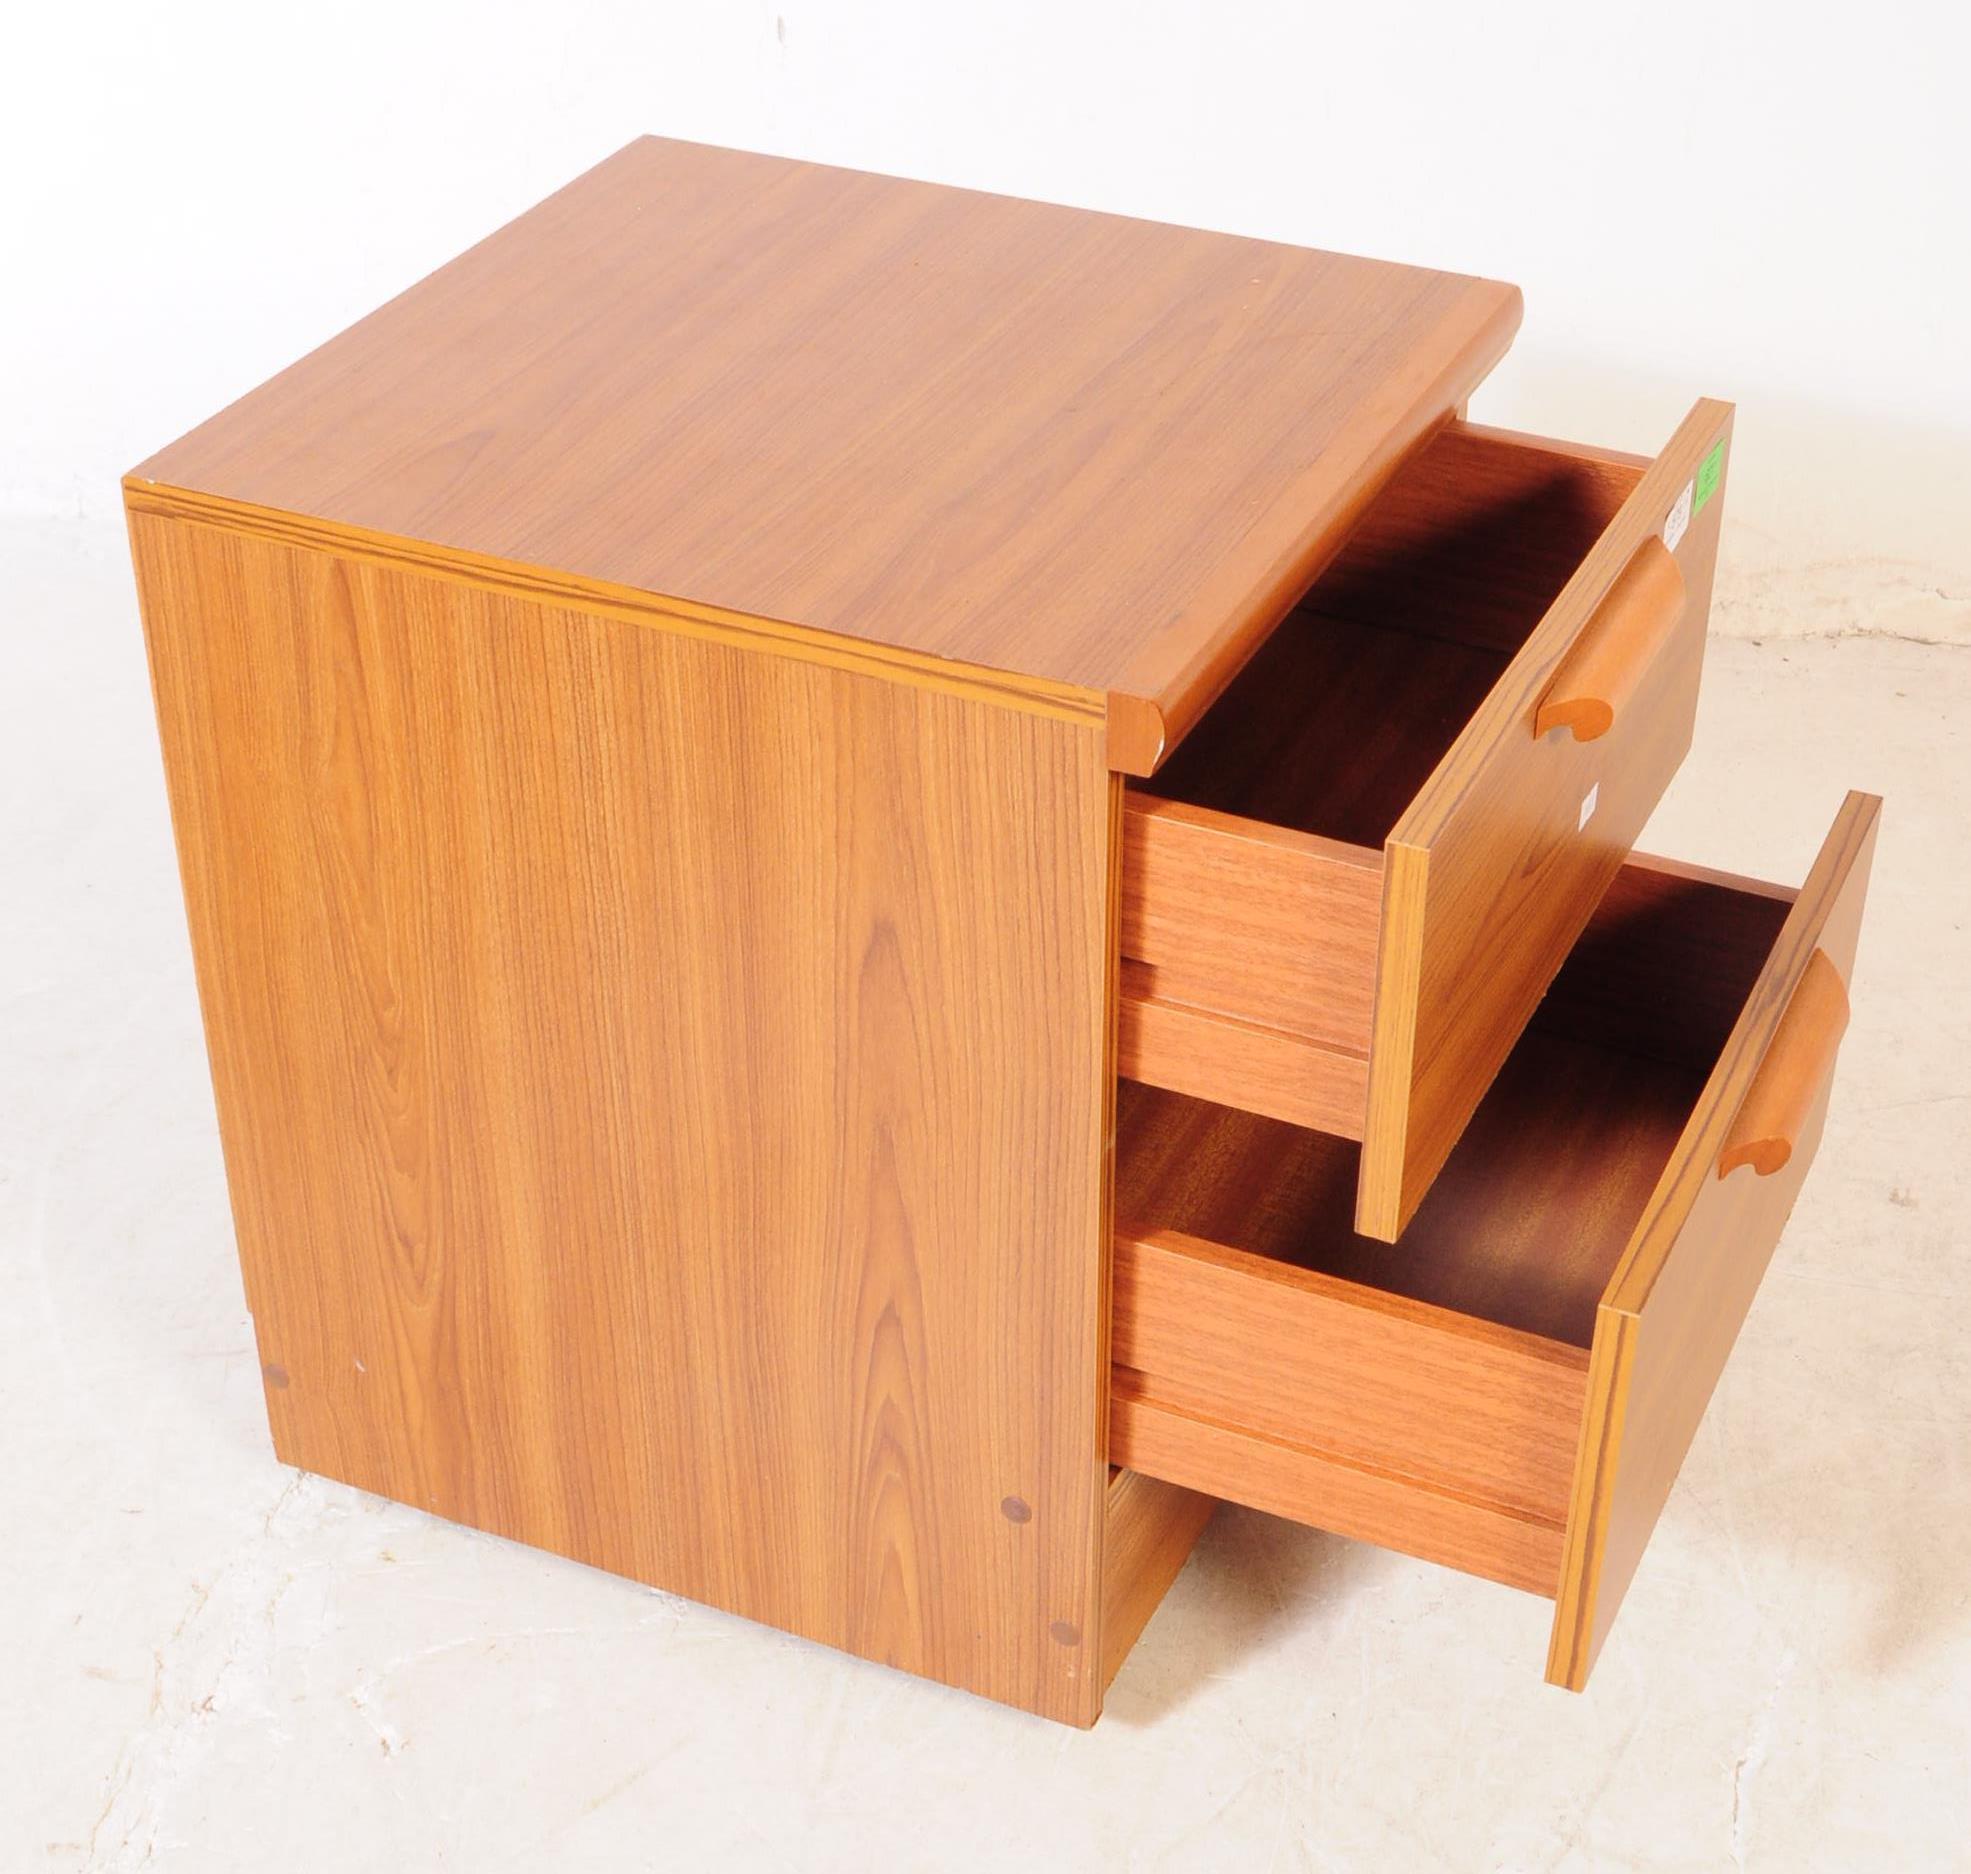 PAIR OF MID CENTURY TEAK BEDSIDE CABINETS - Image 2 of 3